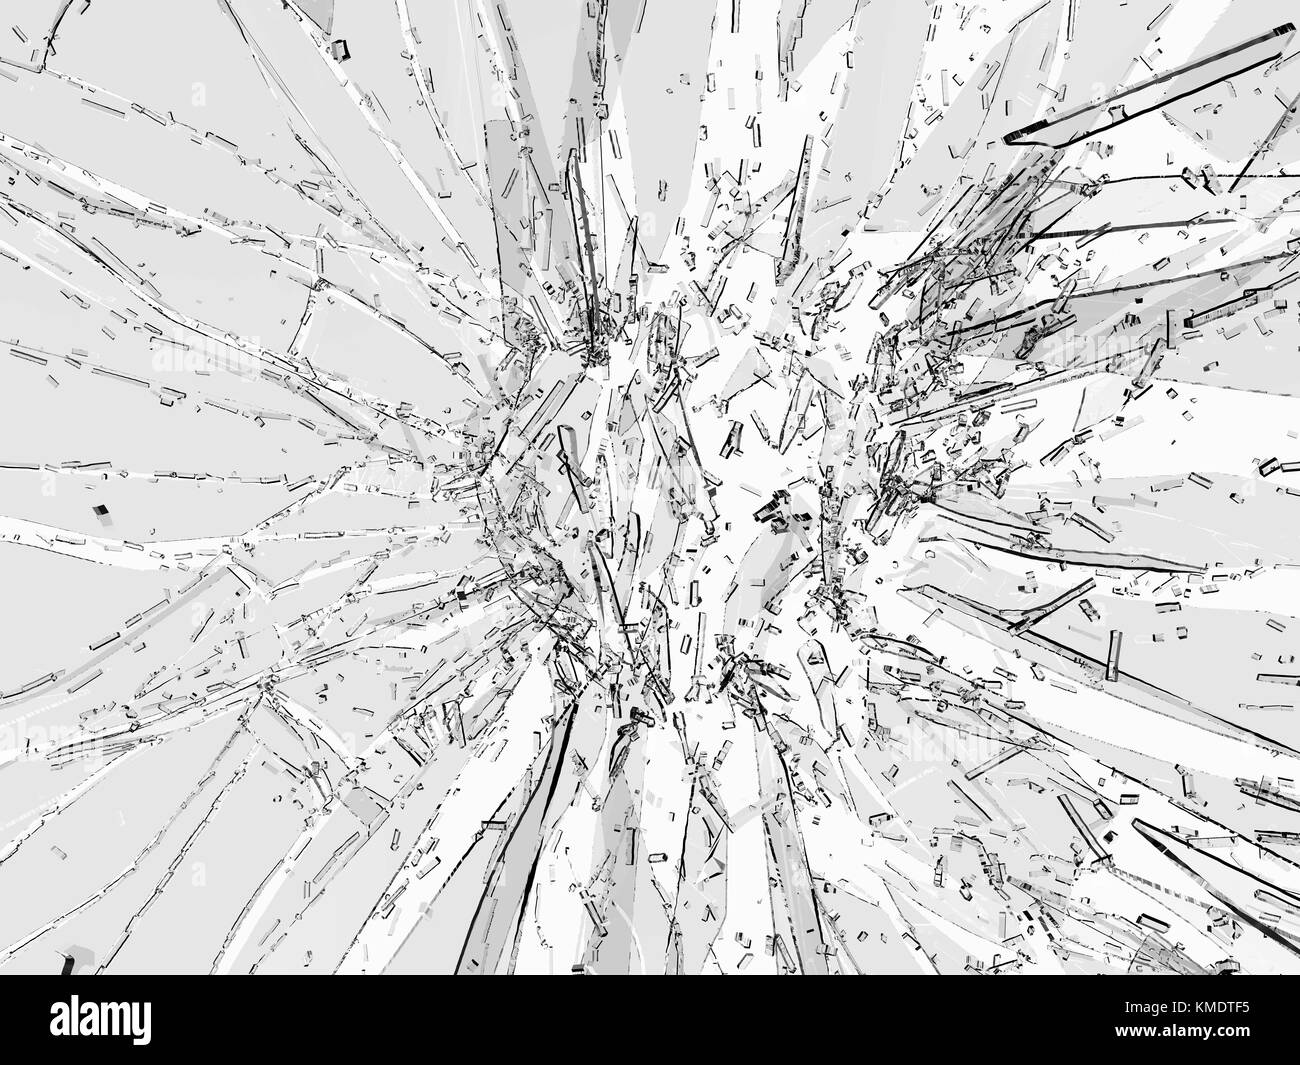 https://c8.alamy.com/comp/KMDTF5/pieces-of-broken-or-shattered-glass-on-white-KMDTF5.jpg